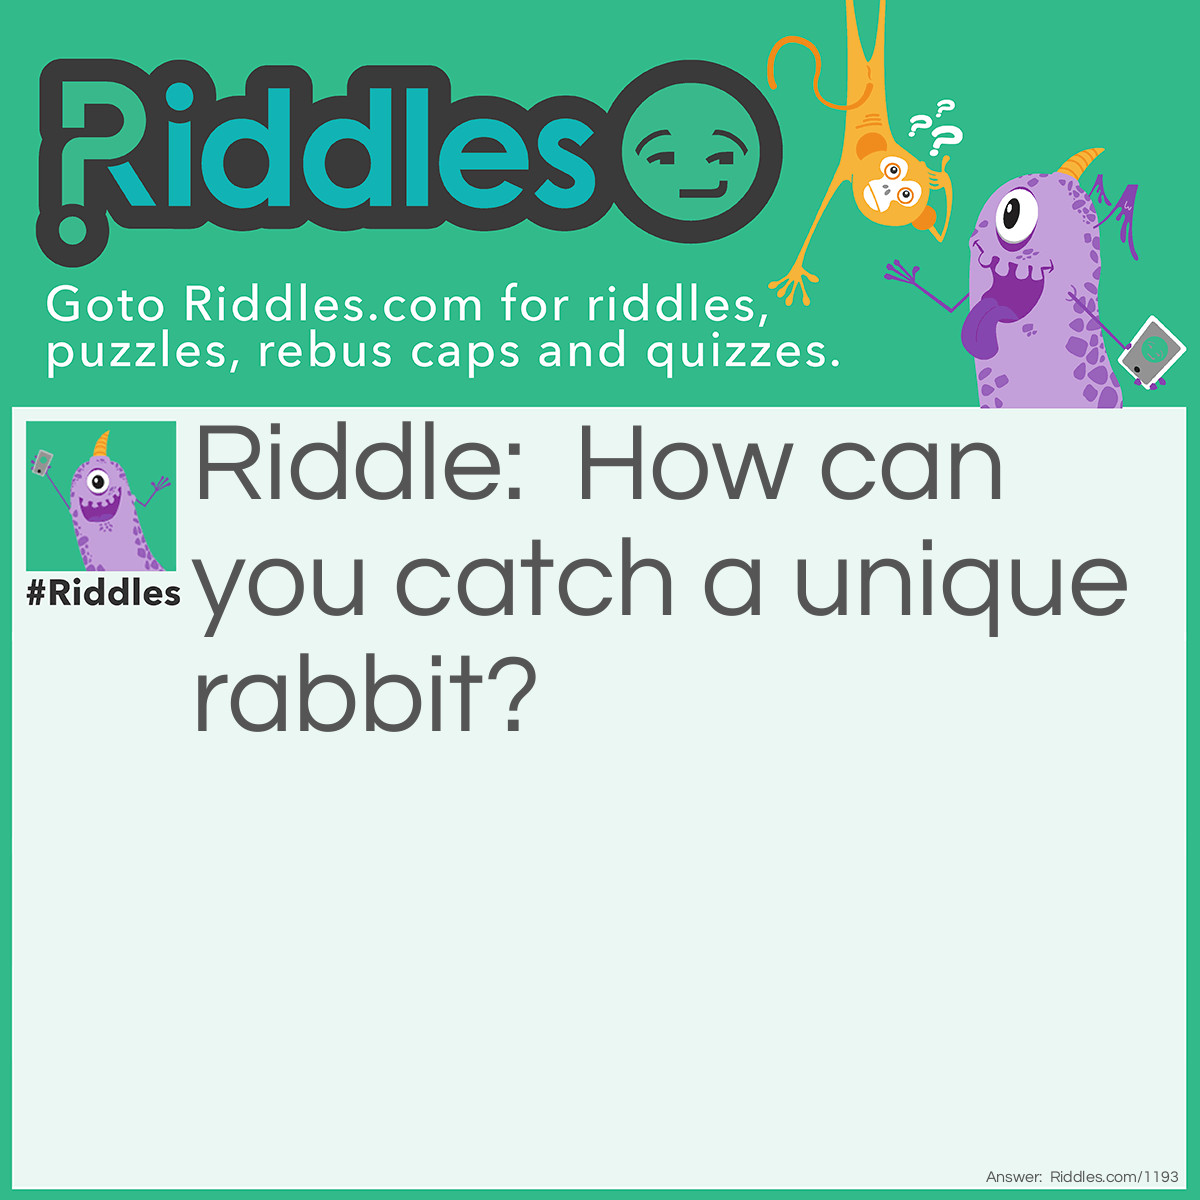 Riddle: How can you catch a unique rabbit? Answer: You u-neak up on it.